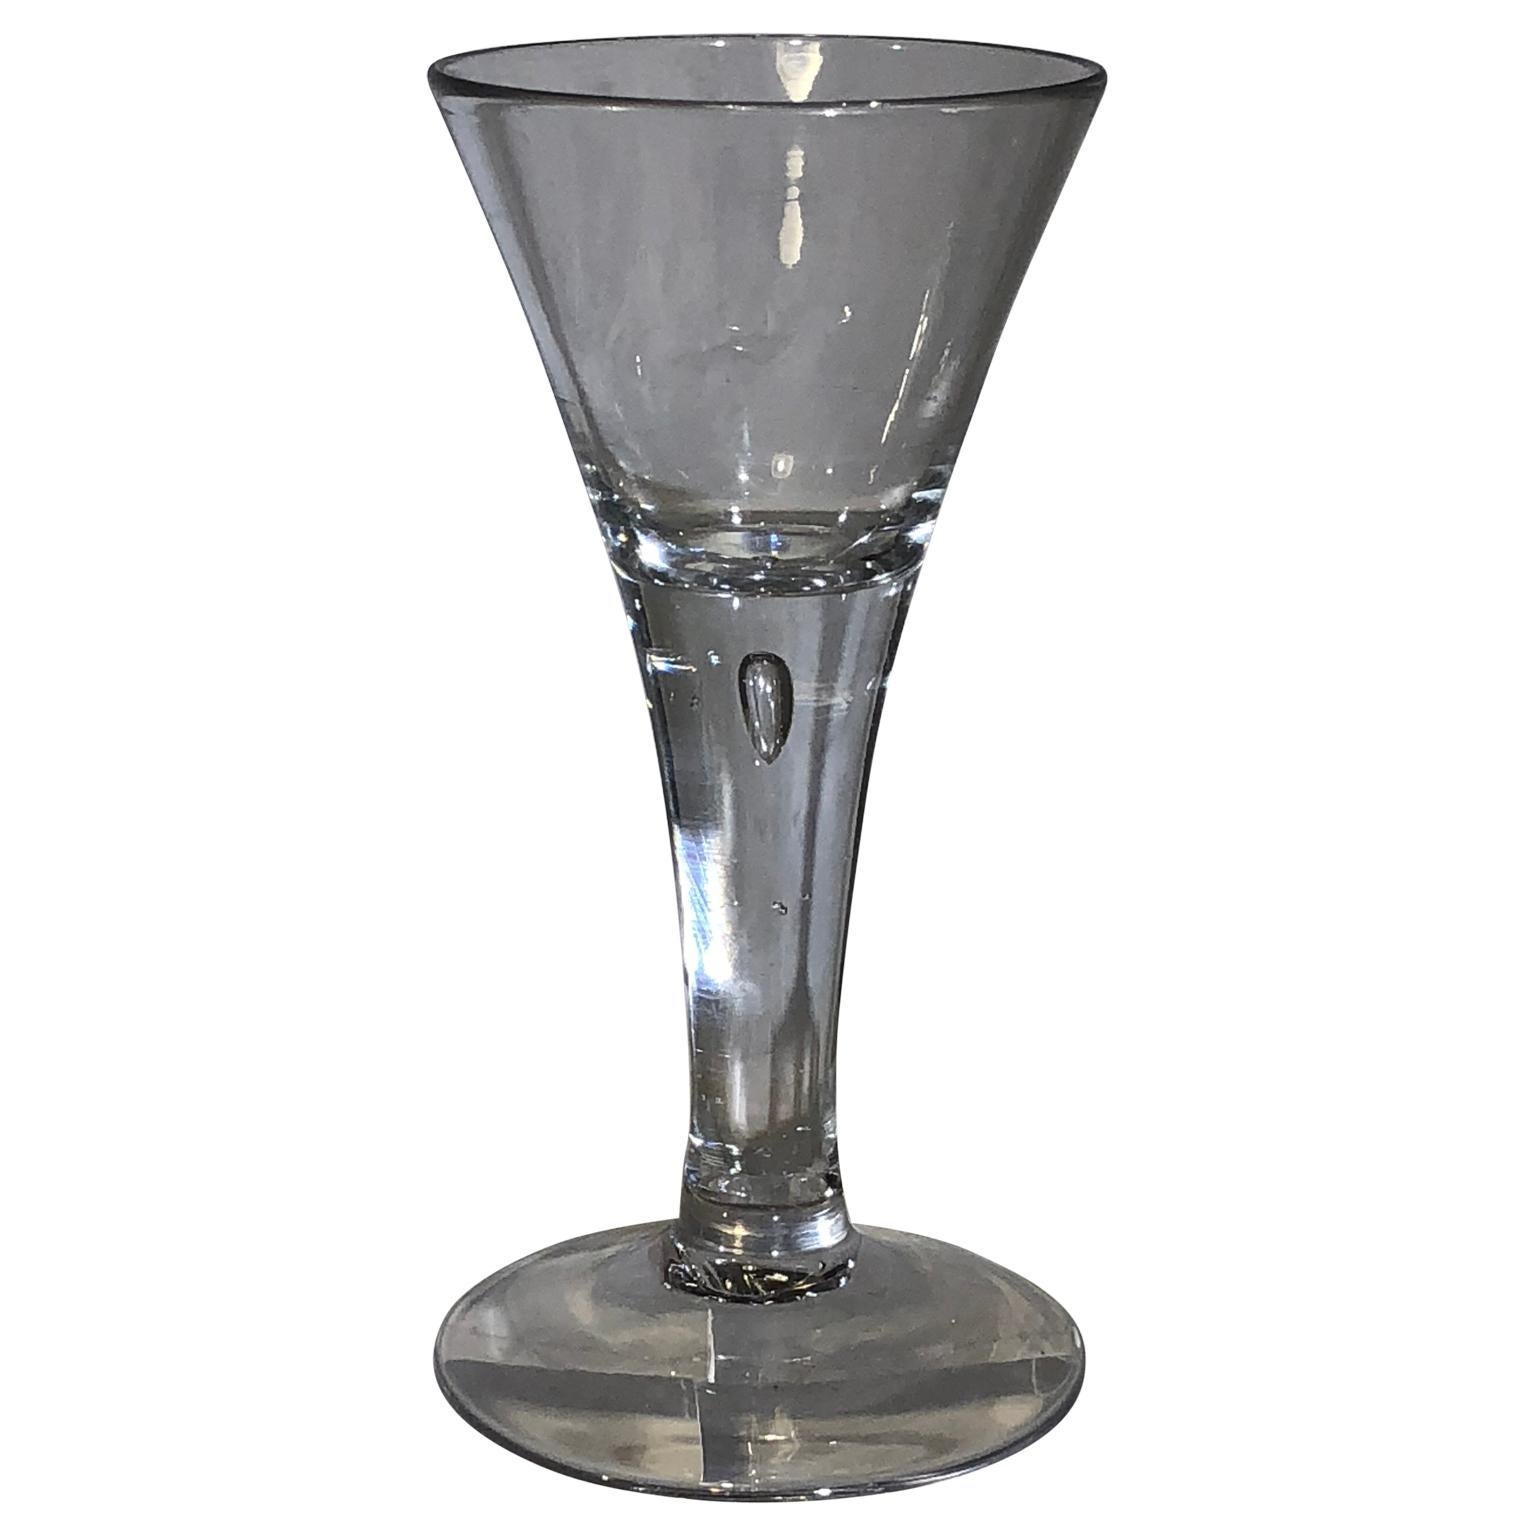 German antique wine drinking glass with air bubble, 18th century.